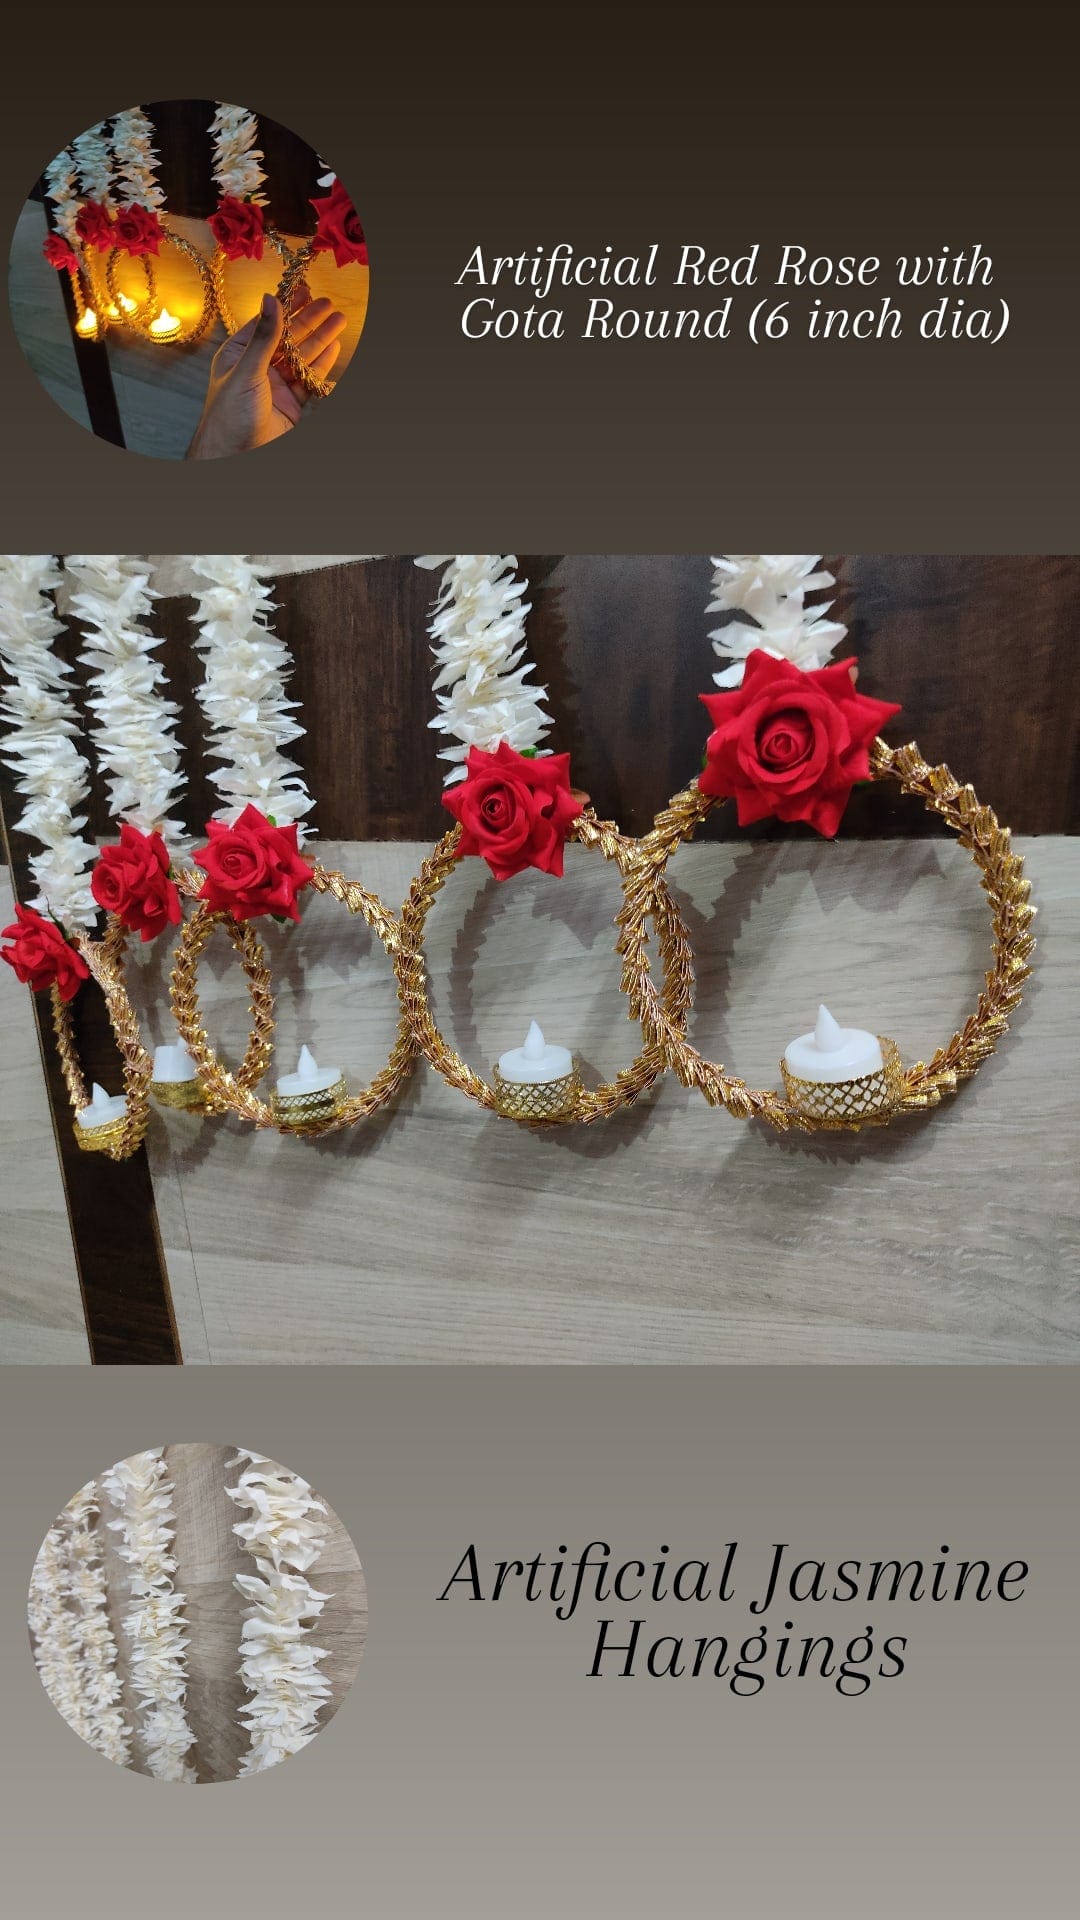 Lamansh marigold candle holder Pack of 70 Hangings at 130 Rs each (5 Feet height) Decorative Round Hanging Gota candle holder stand attached to jasmine & rose garlands / decoration for diwali 🔆 & navratri festive events